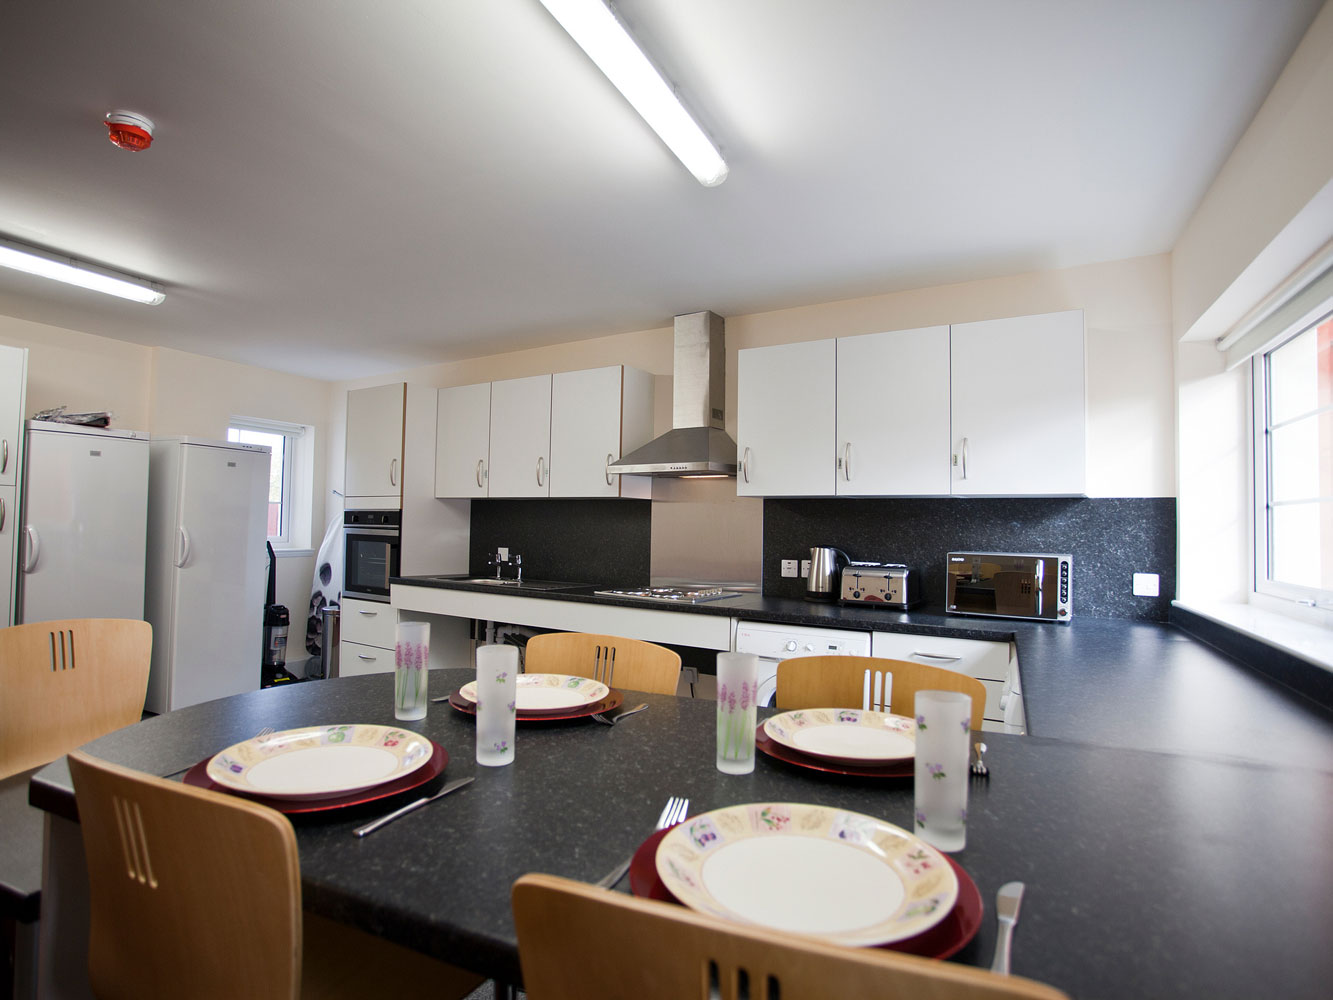 fitted kitchen area with dining space, fridge freezers and appliances